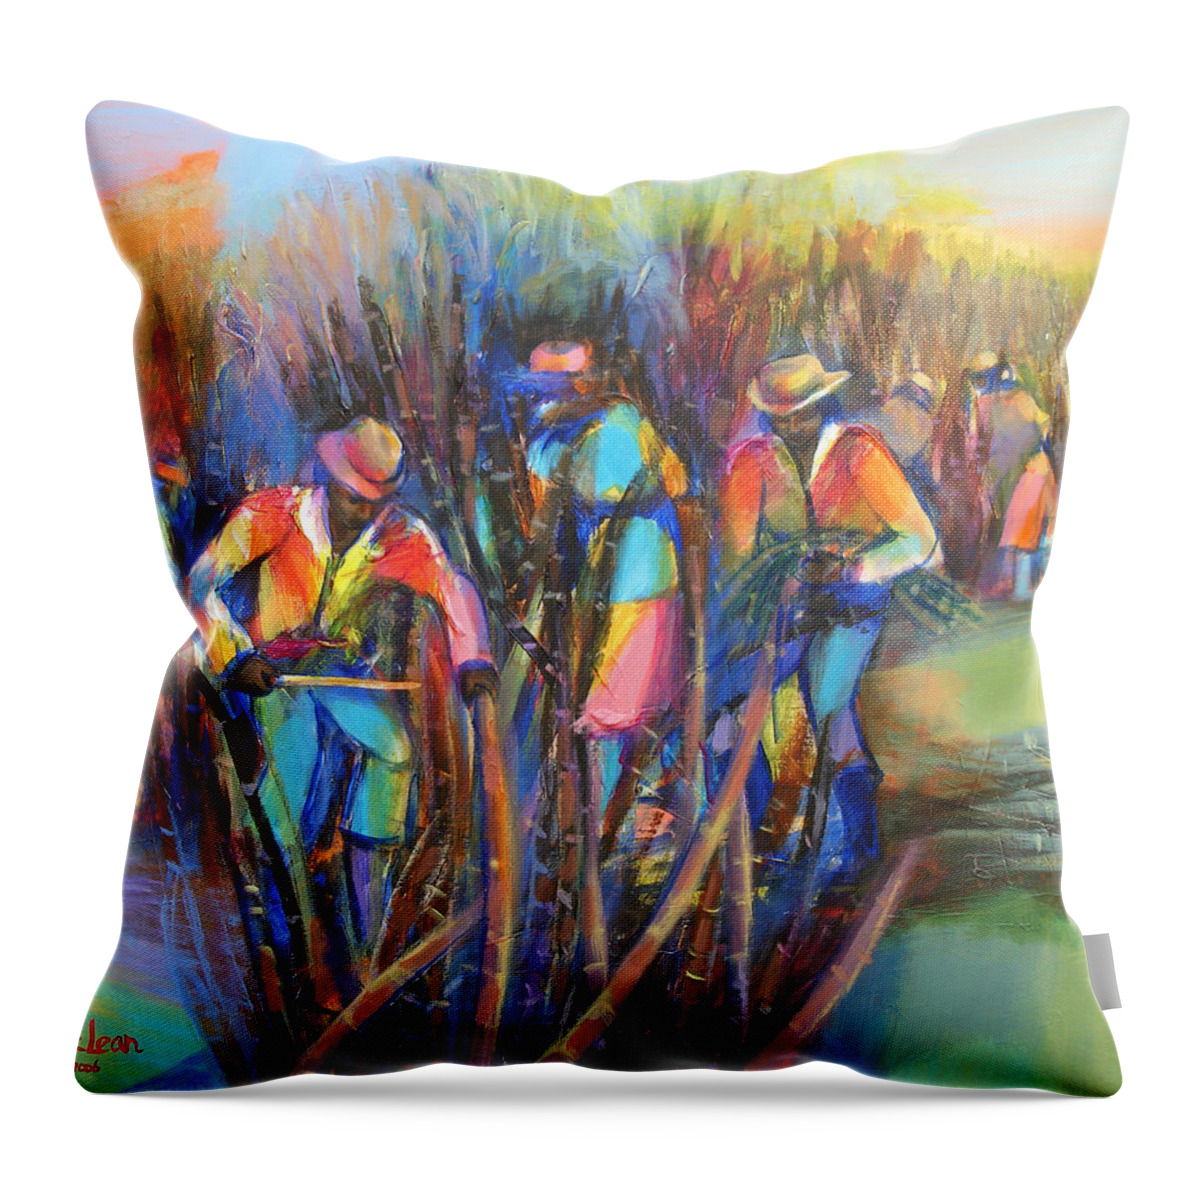 Abstract Throw Pillow featuring the painting Sugar Cane Harvest by Cynthia McLean